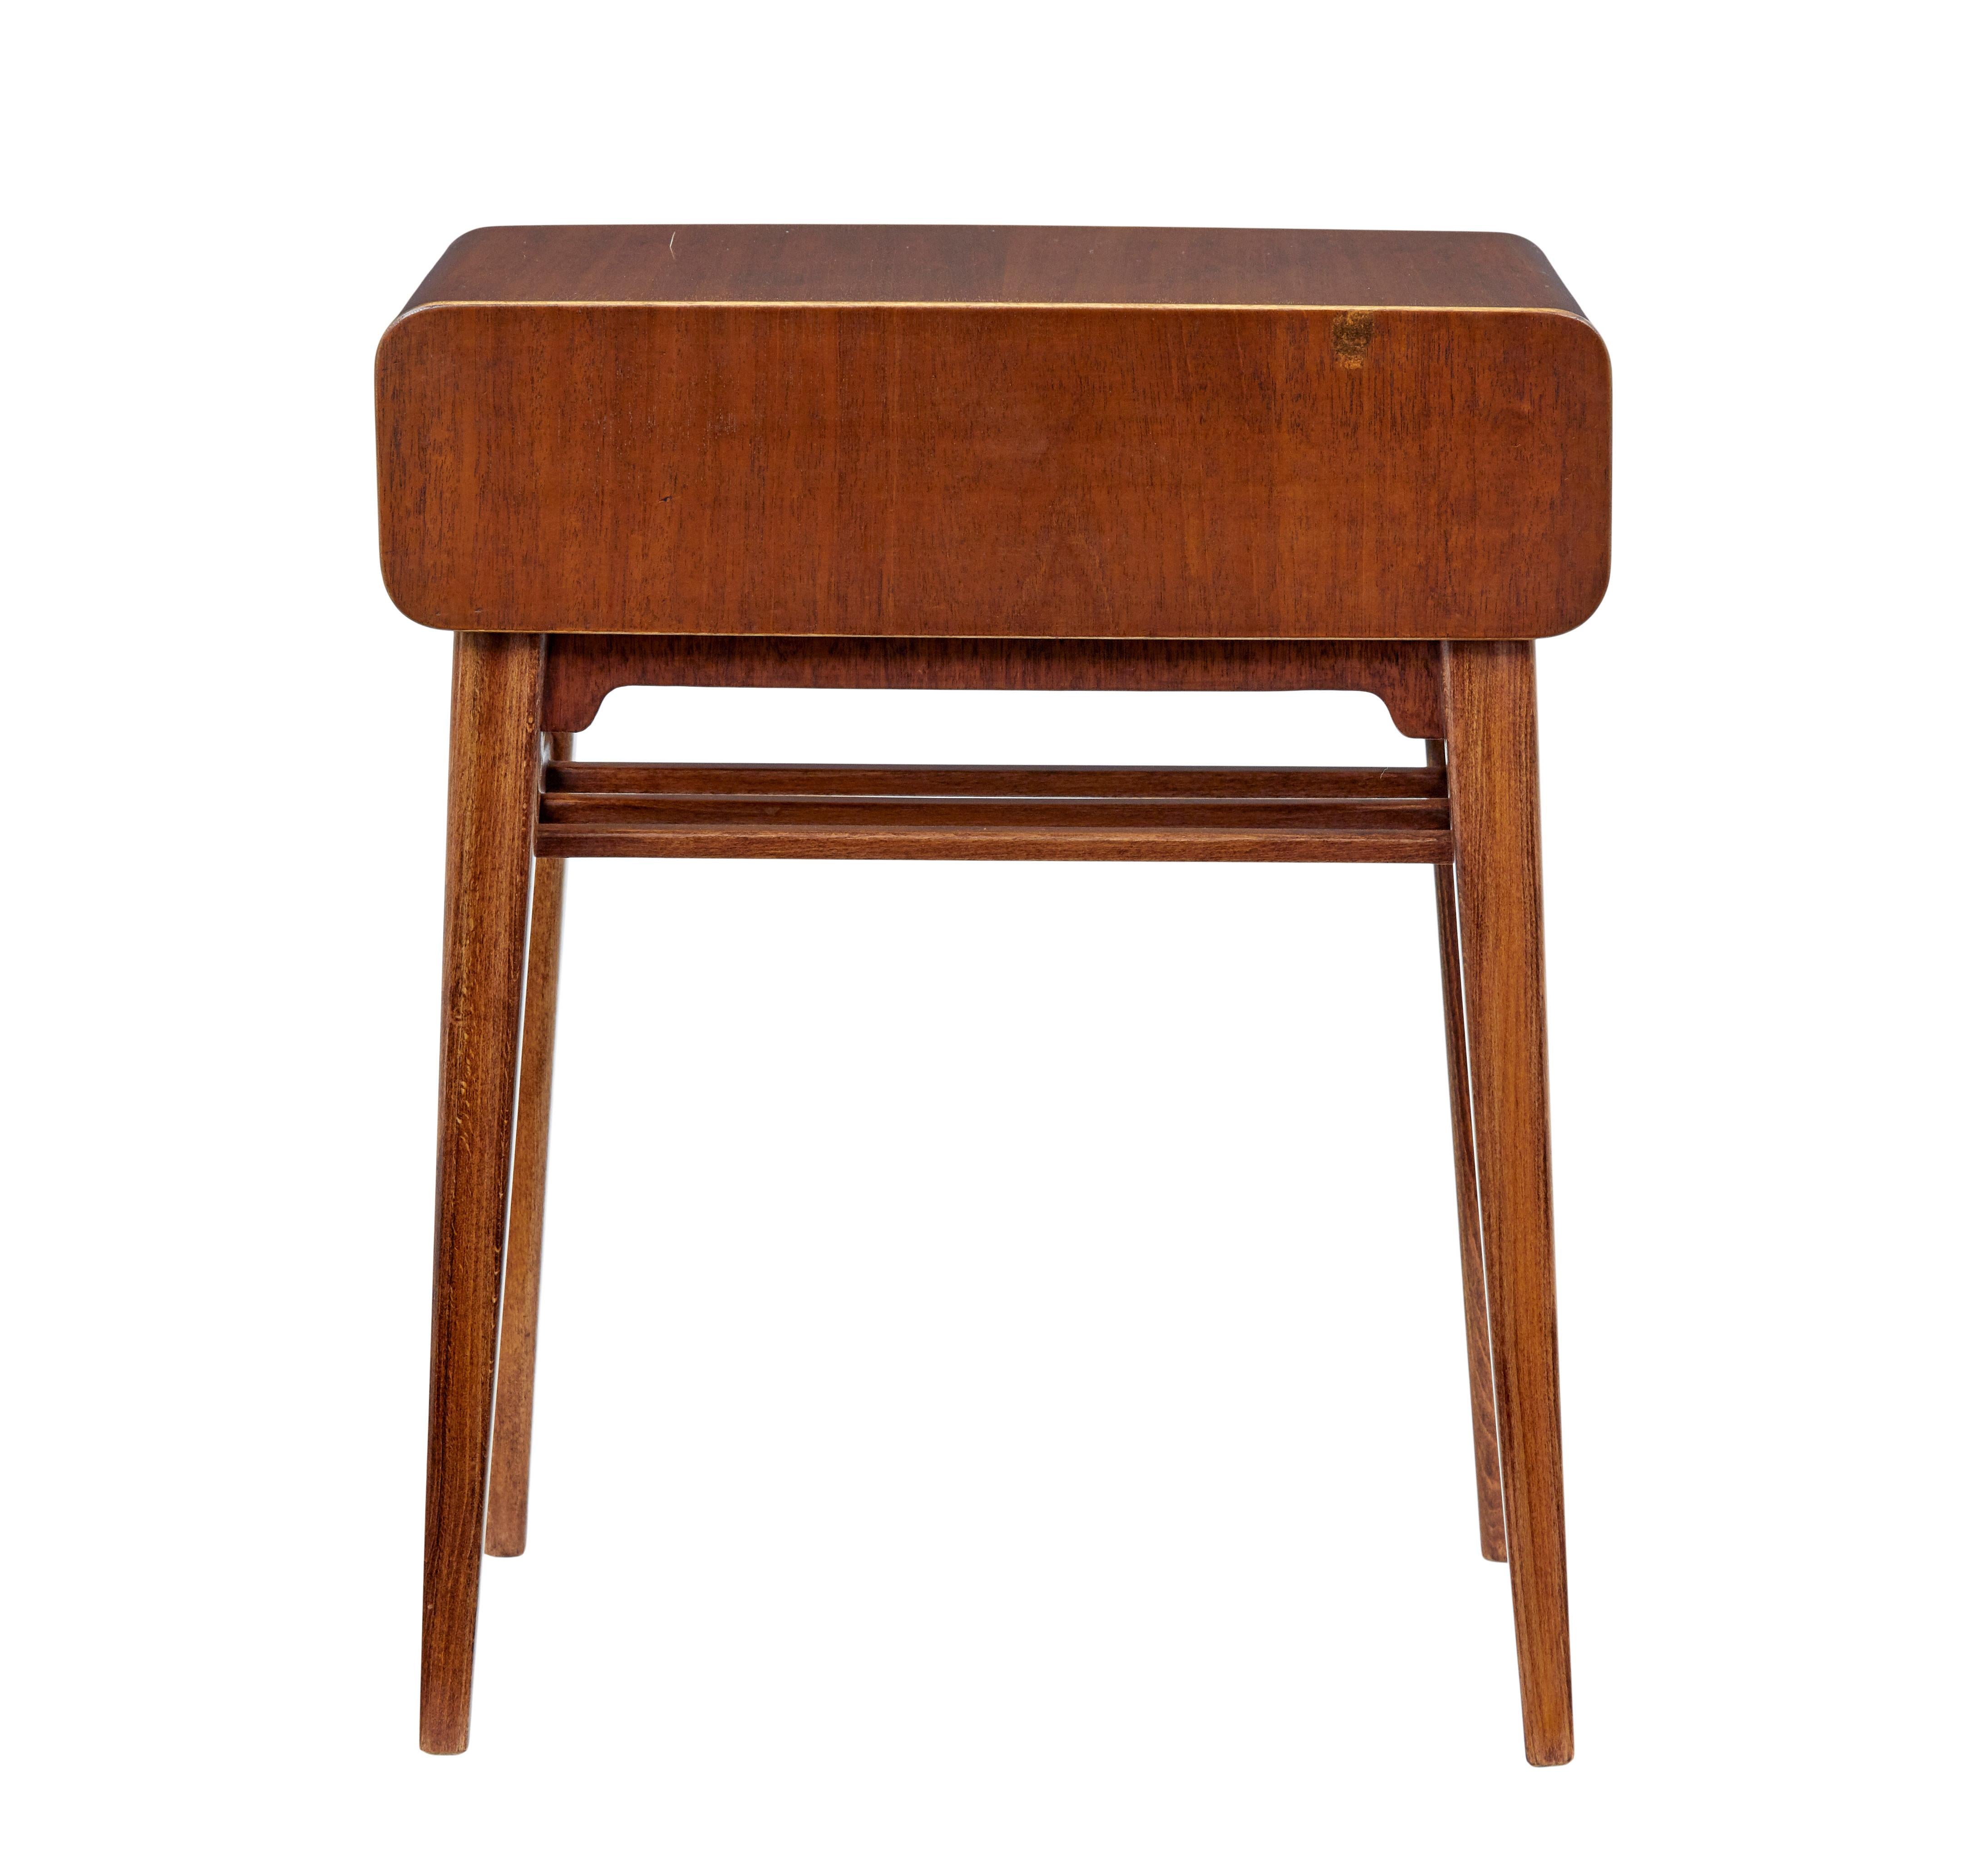 Swedish Mid-20th Century Mahogany Bedside Table by Bodafors For Sale